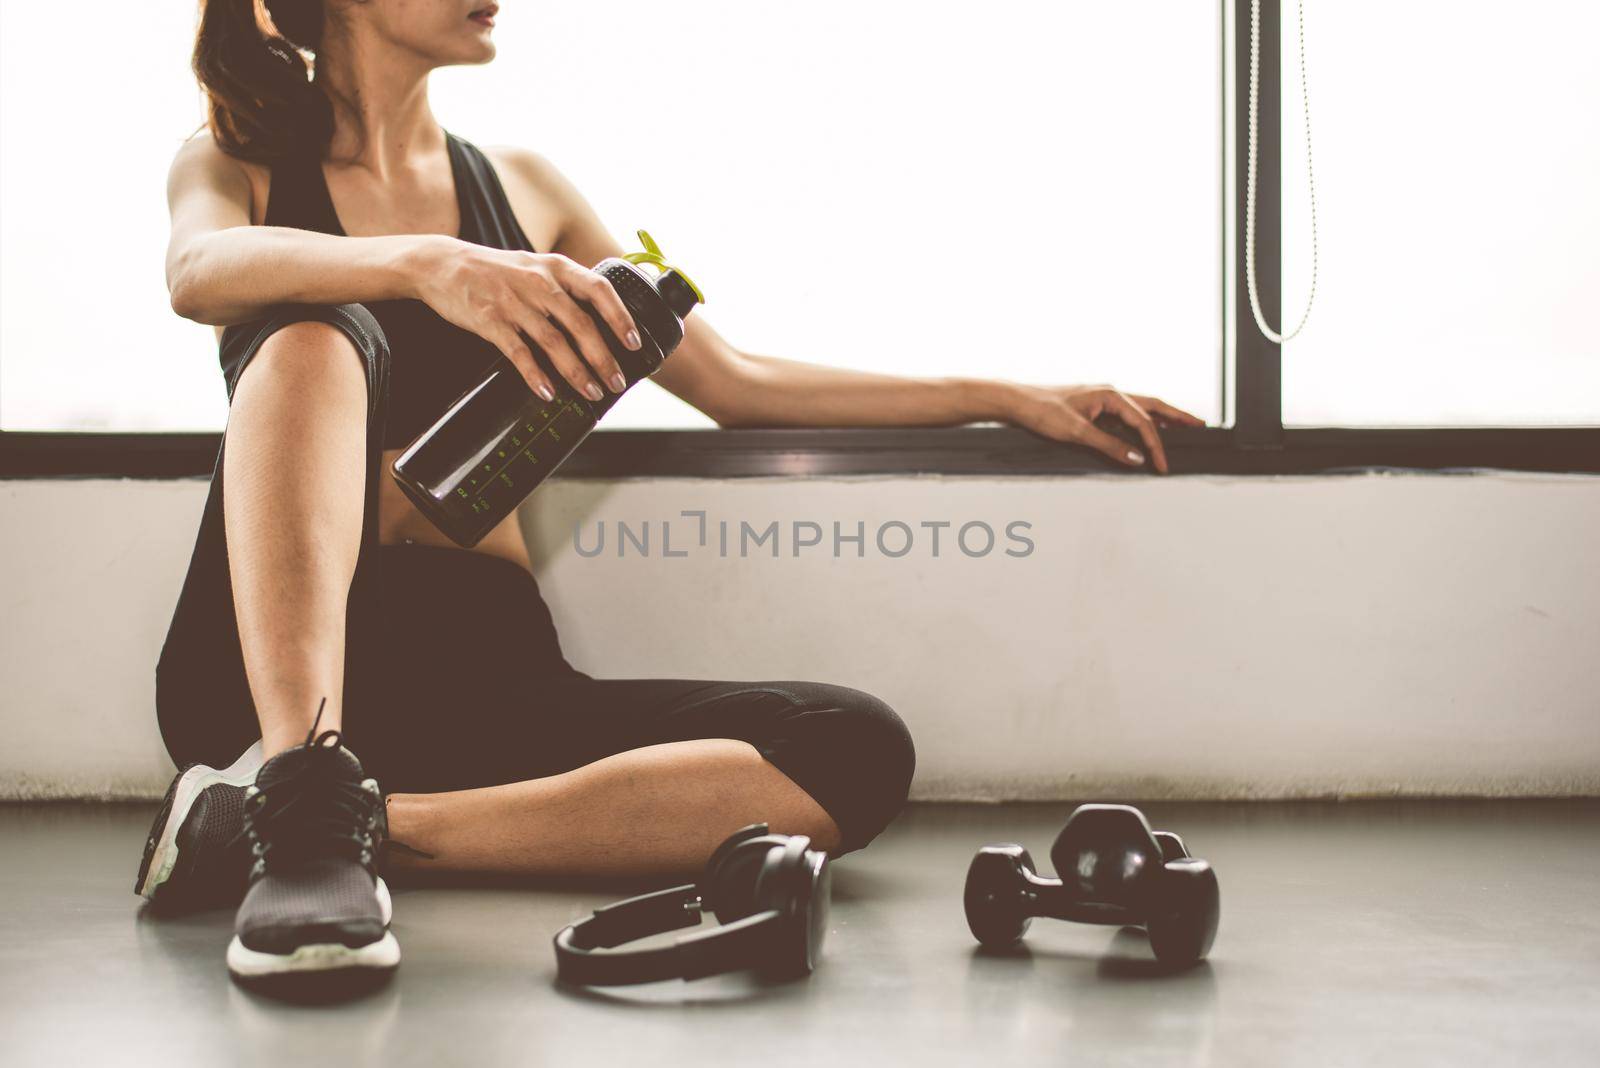 Woman with dumbbell and device exercise lifestyle workout in gym fitness breaking relax after sport training with protein shake bottle background. Healthy lifestyle bodybuilding and athlete muscles